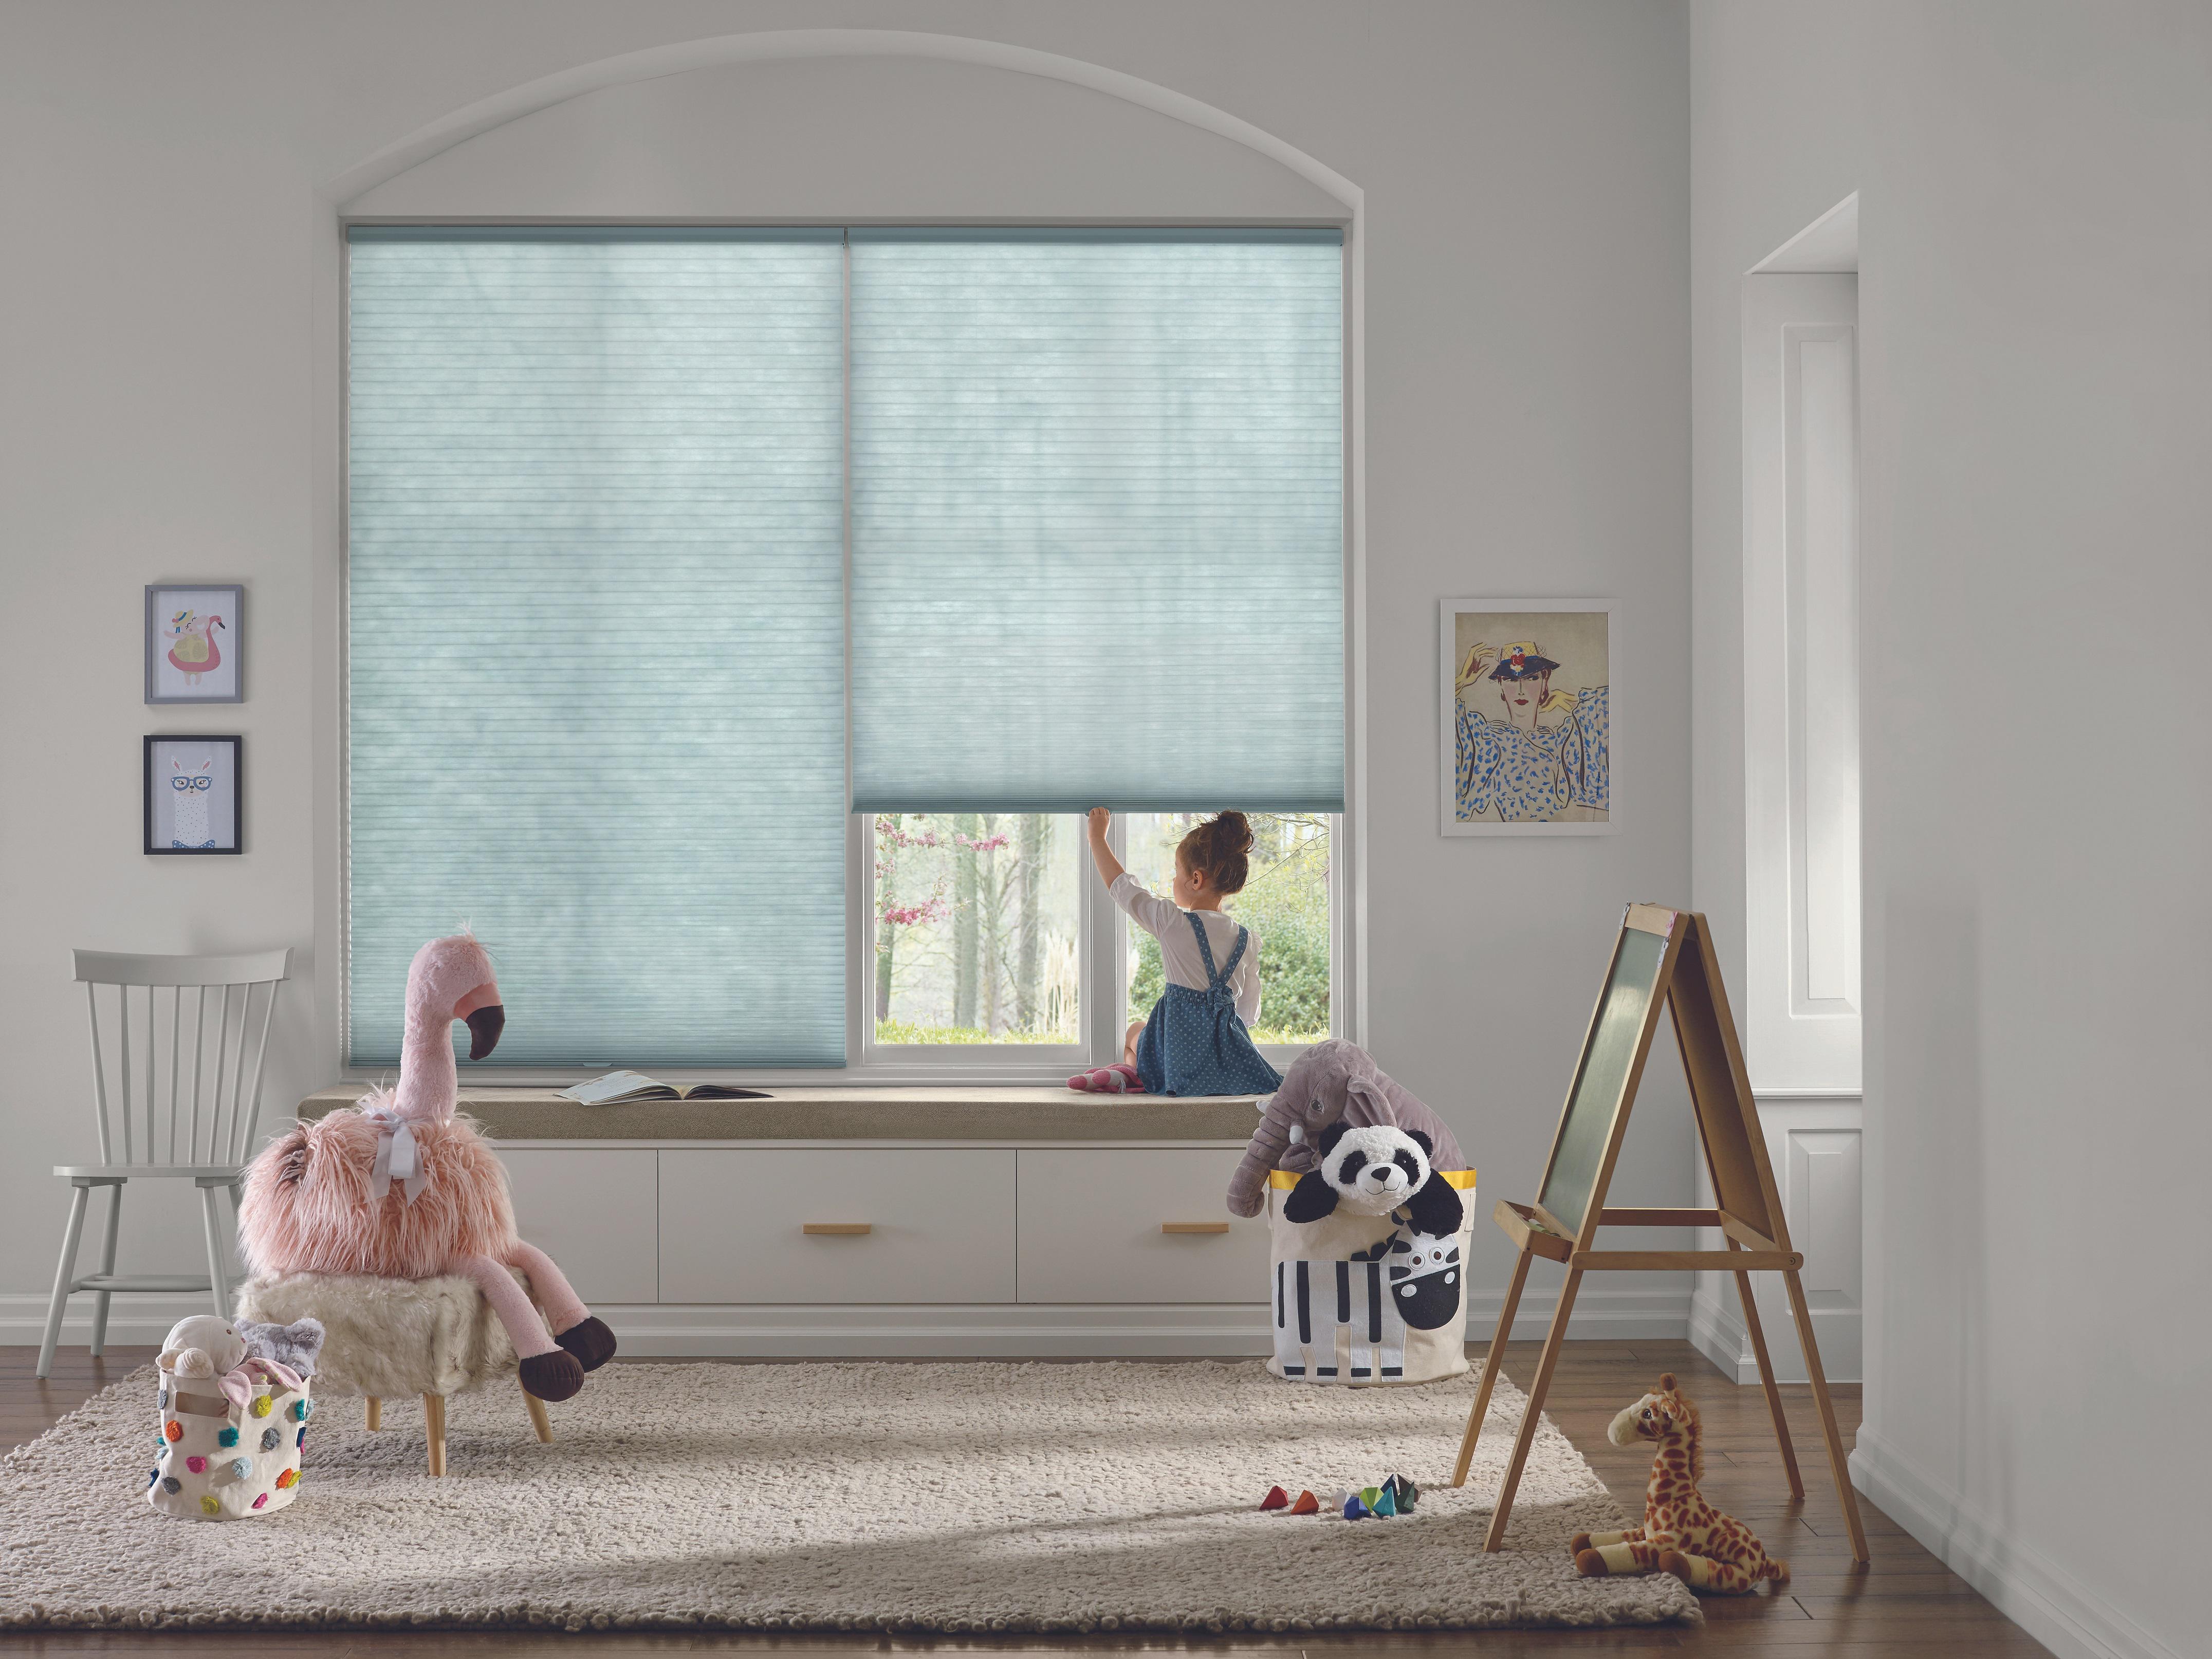 Transform your playroom into a haven with our stunning Cellular Shades from Hunter Douglas! These child-safe shades in Pasadena-Altadena are not only stylish but also ensure the safety of your little ones. The innovative design of Hunter Douglas Cellular Shades provides energy efficiency